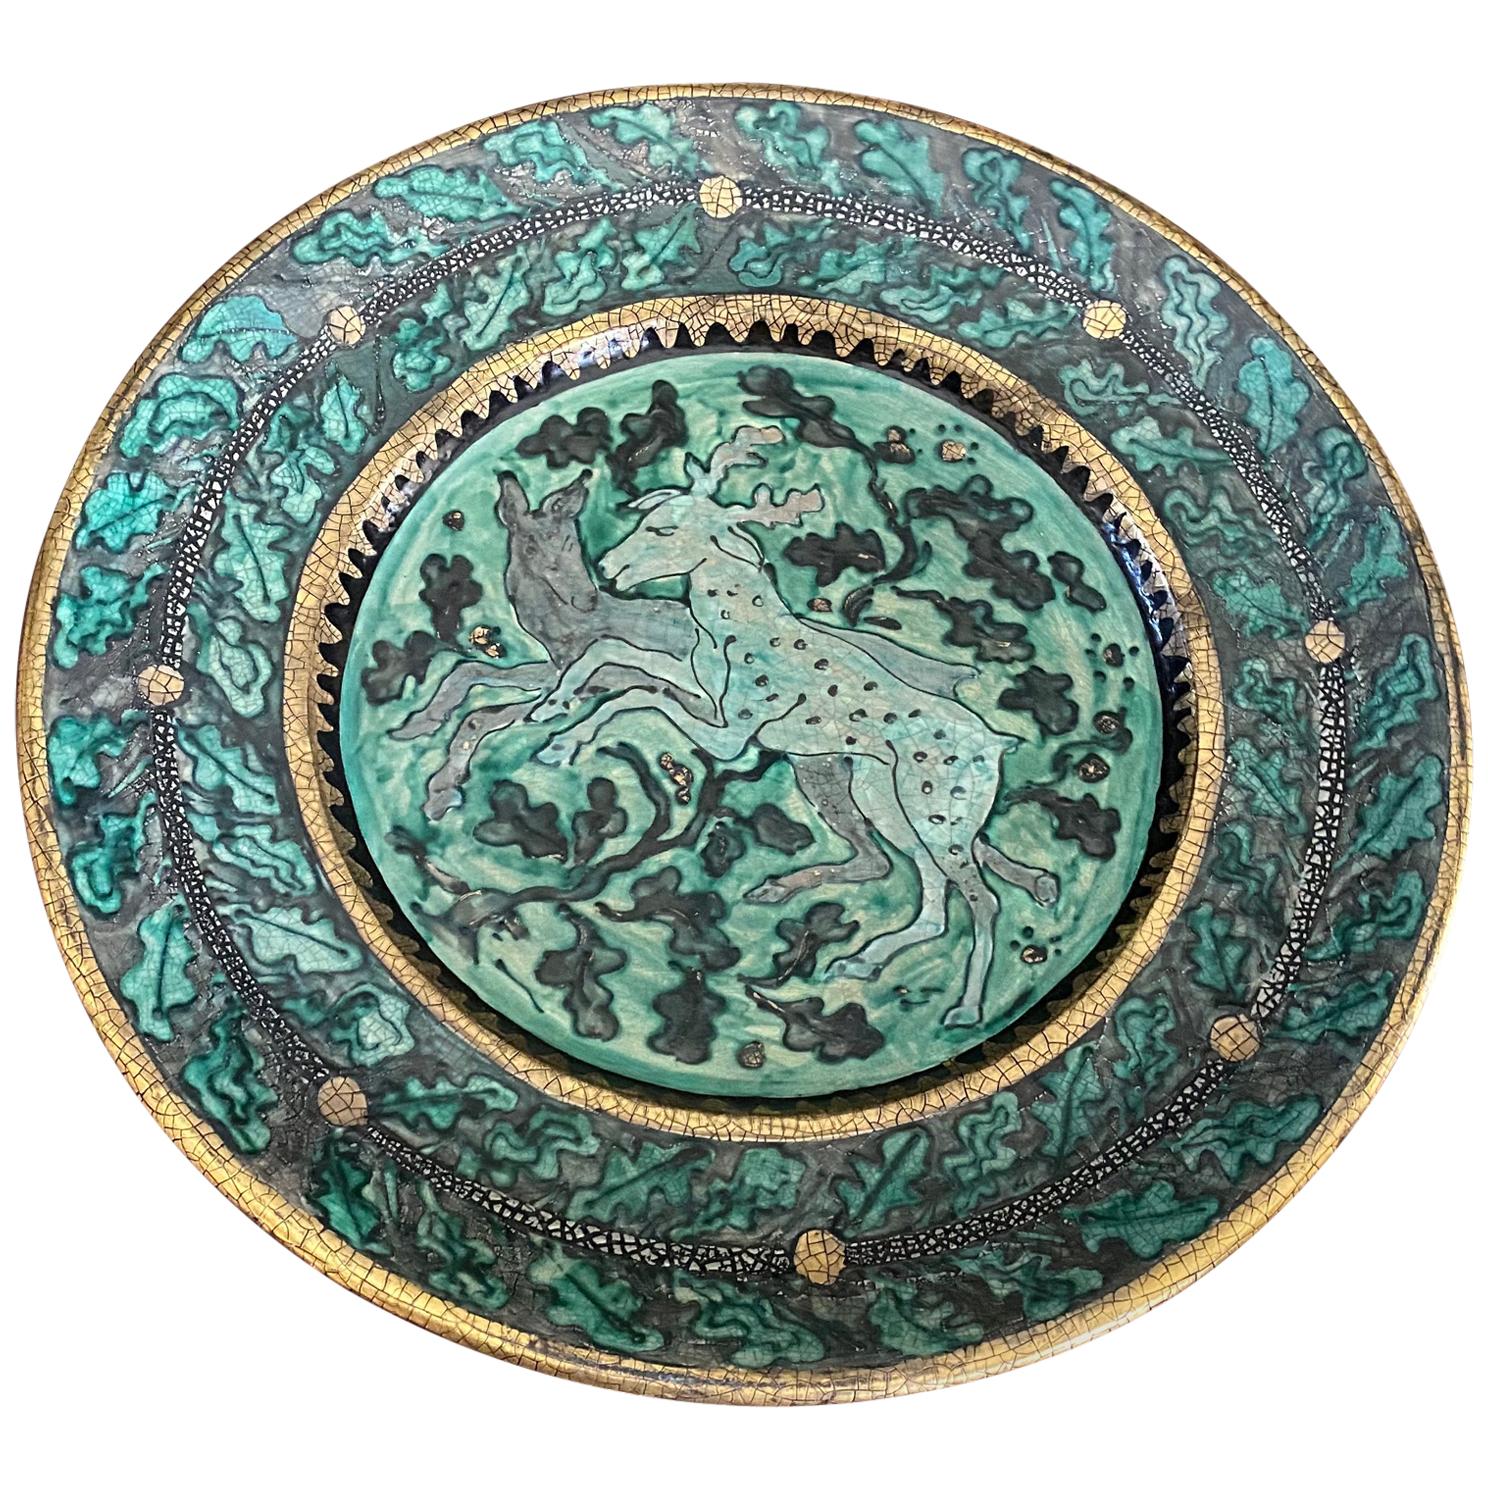 Green and Gilt Enamel Craquelure Charger by Andre Methey, Early 20th Century